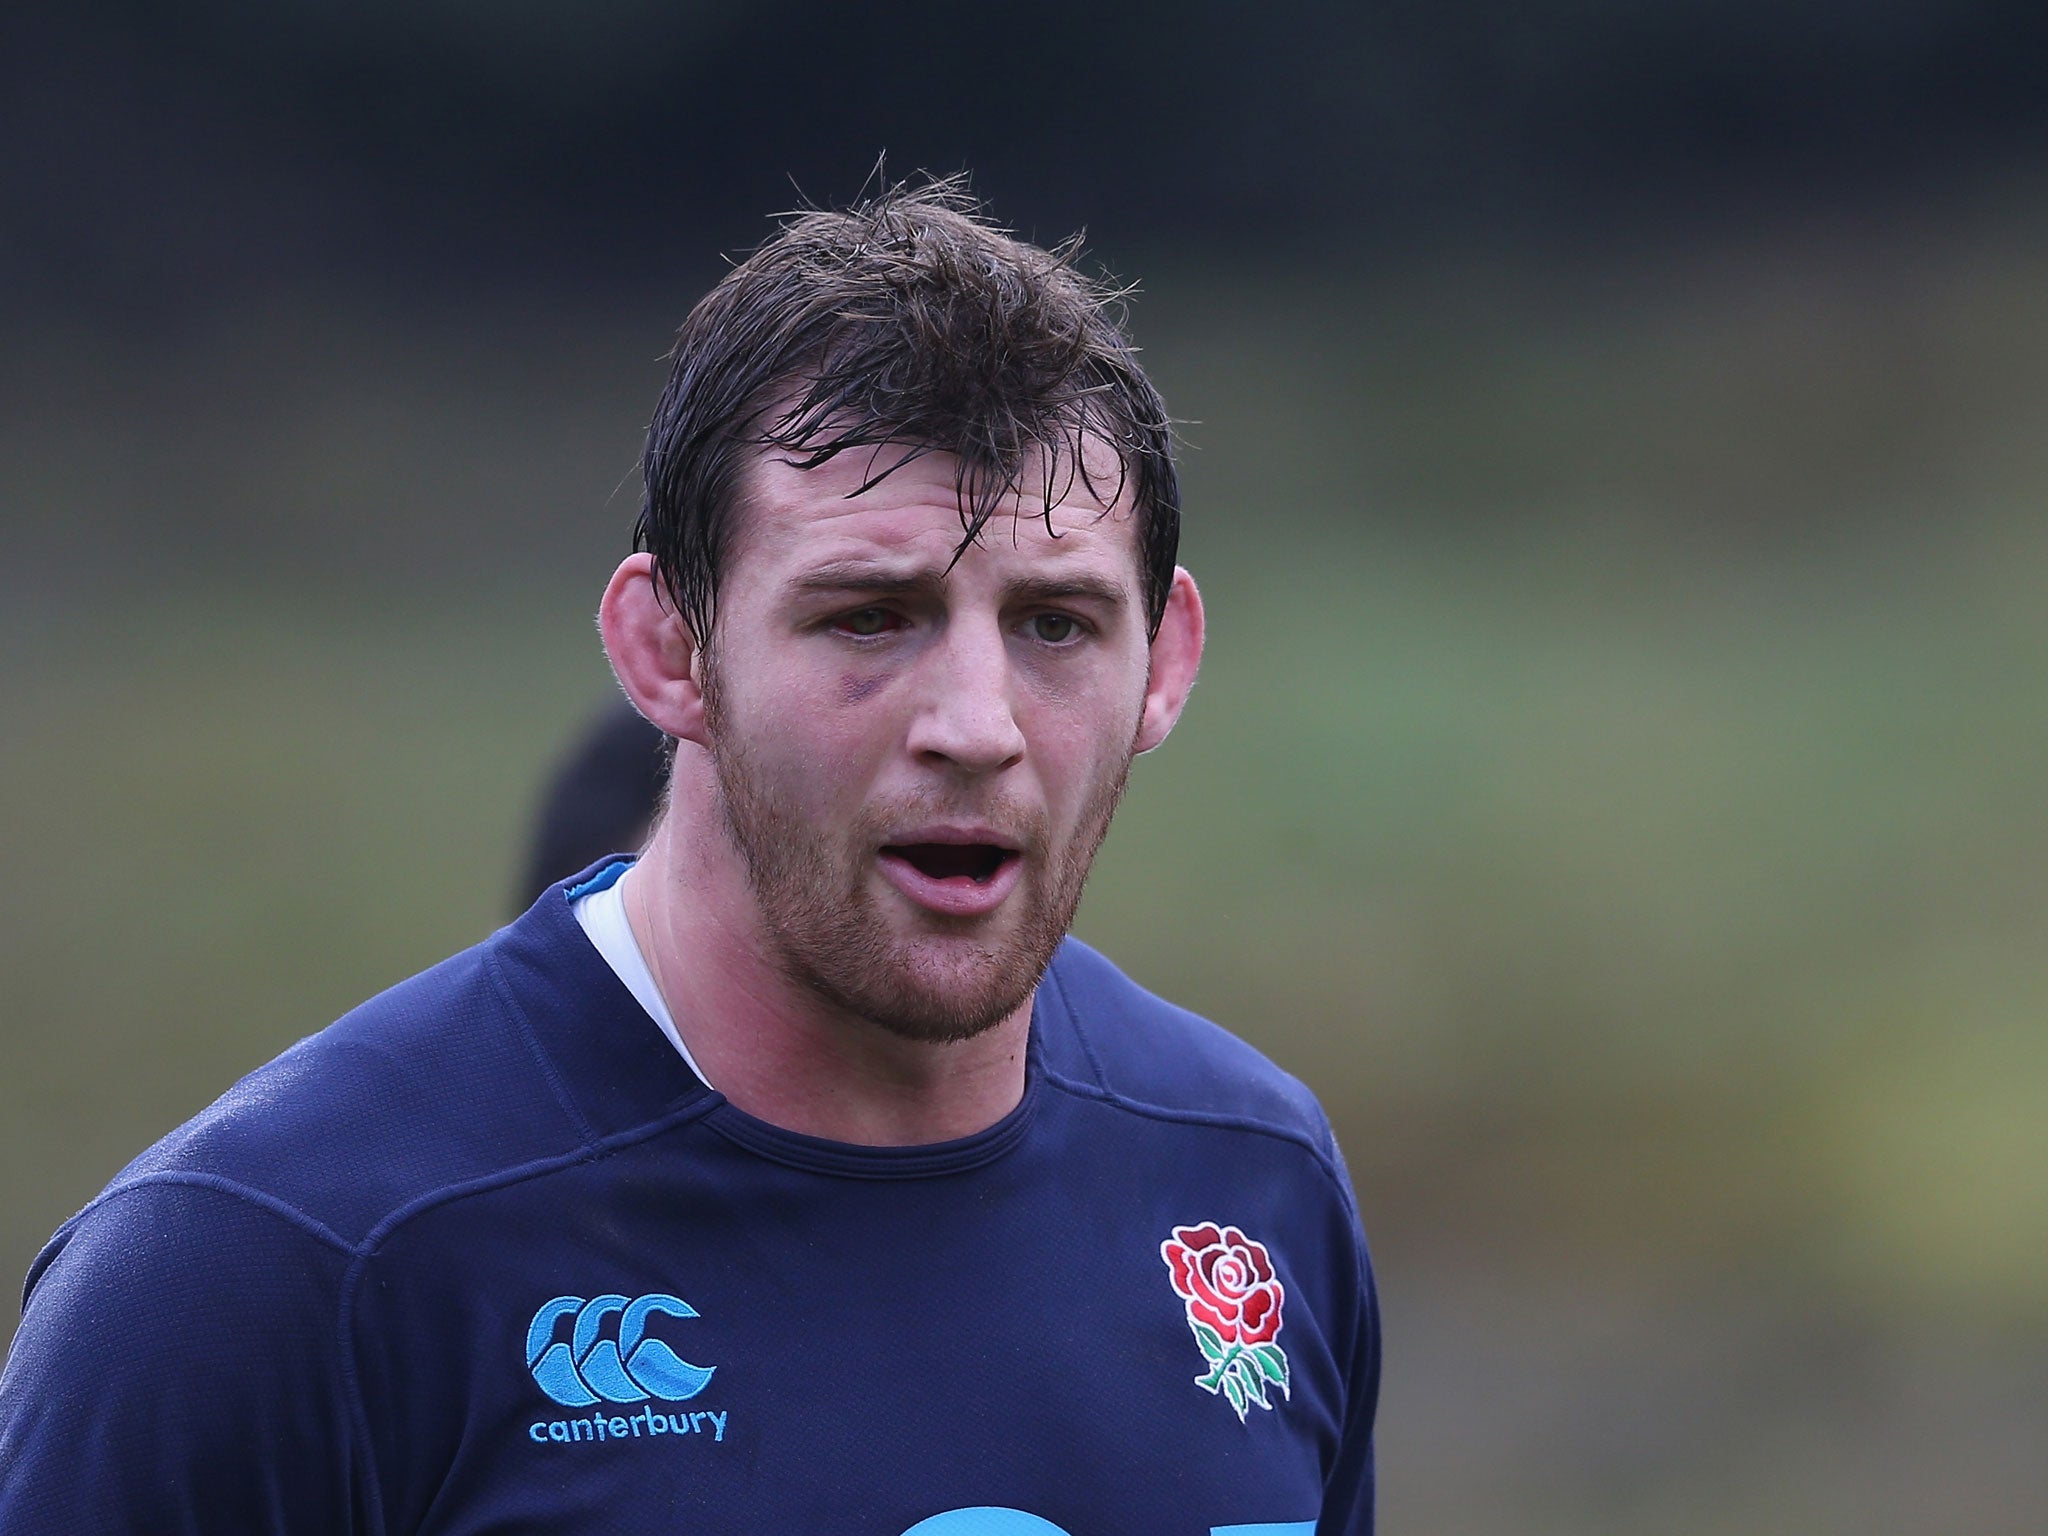 Tom Wood sports a shiner from a clash of heads during England training at Pennyhill Park